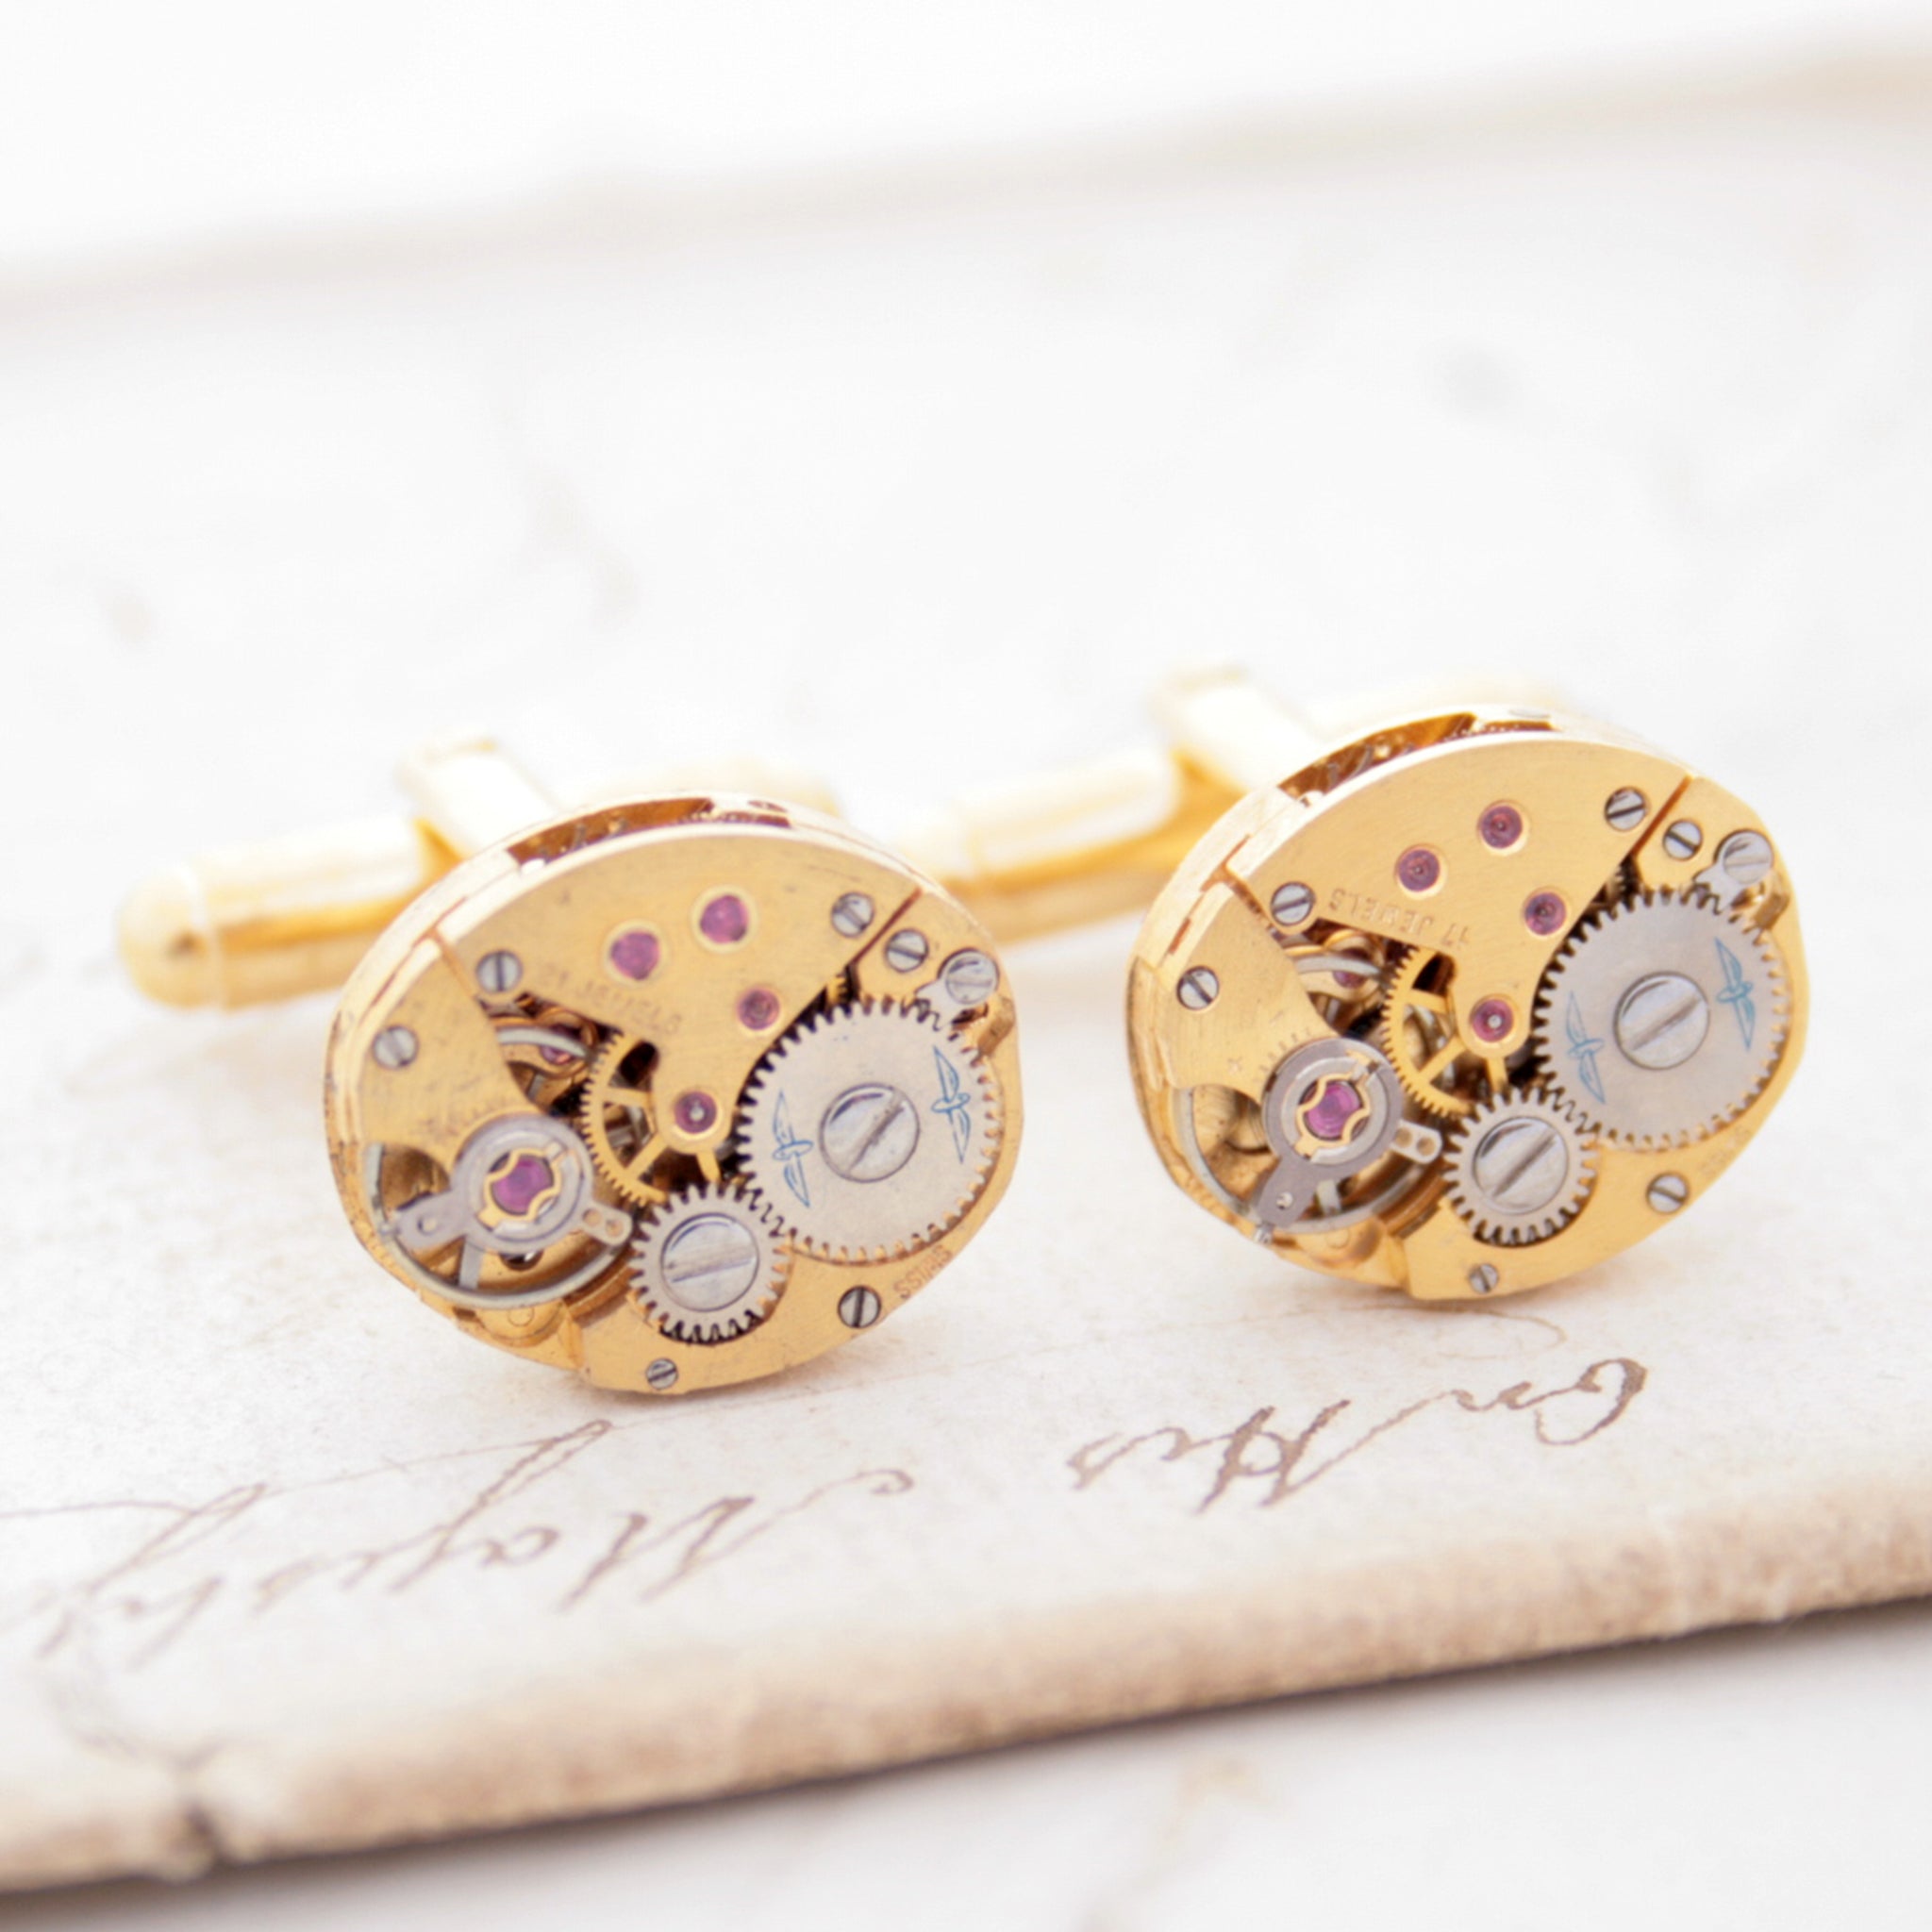 Gold Watch Cufflinks made of Rotary watch movements